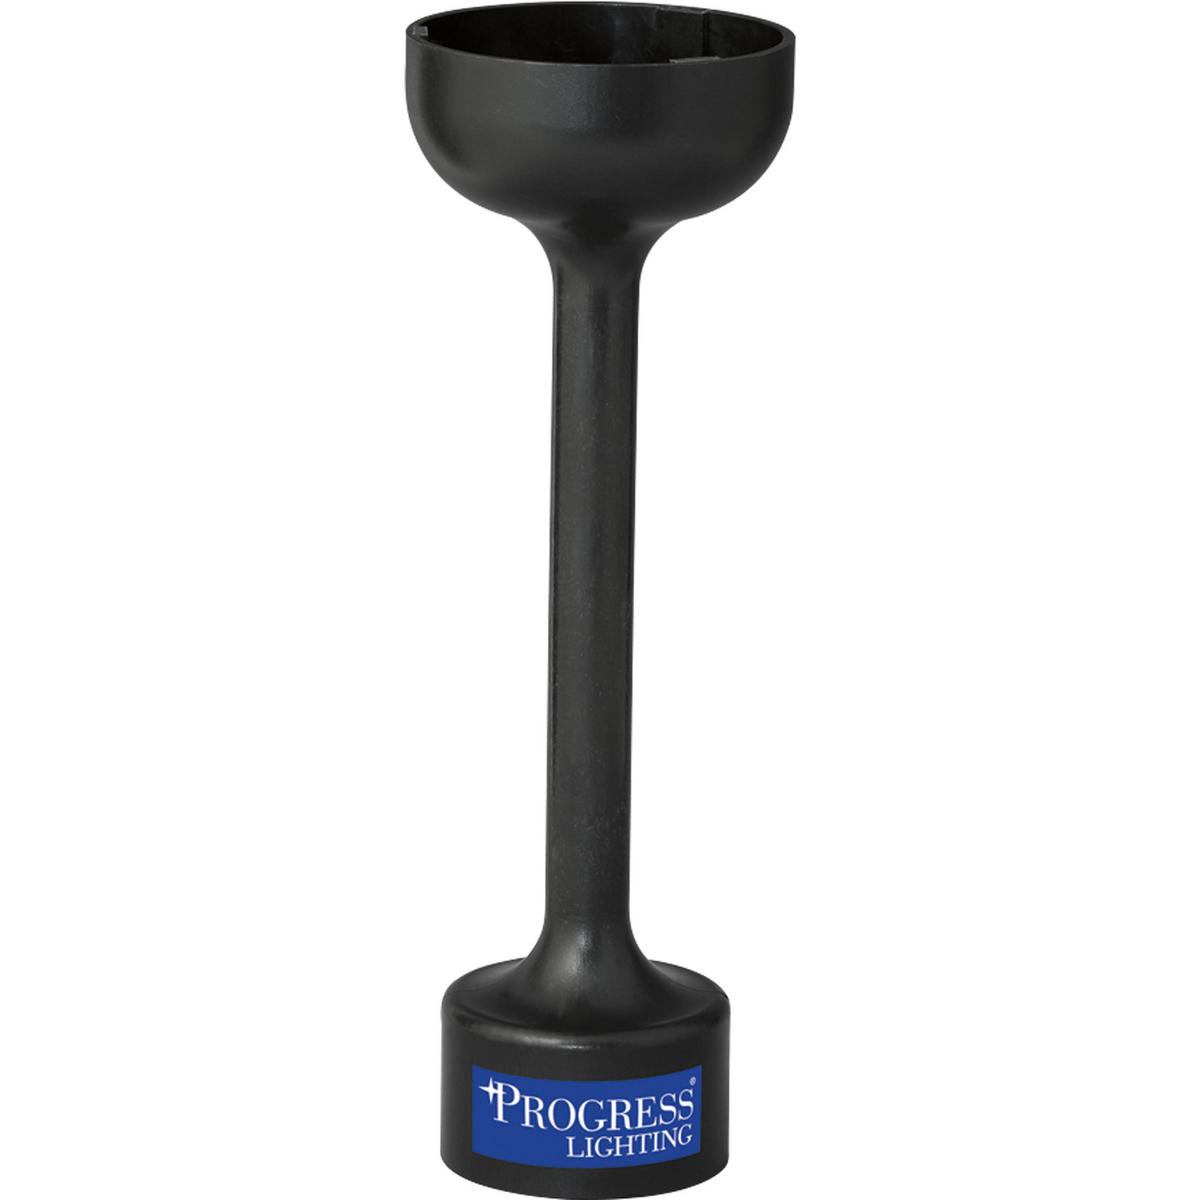 Hubbell P8685-01 Progress Lighting's socket tool accessory is designed to provide extra leverage and eliminate loose fit when installing glass shades. The socket tool extends into the shade and tightens the socket ring, securing the shade in place, and can reverse to loos